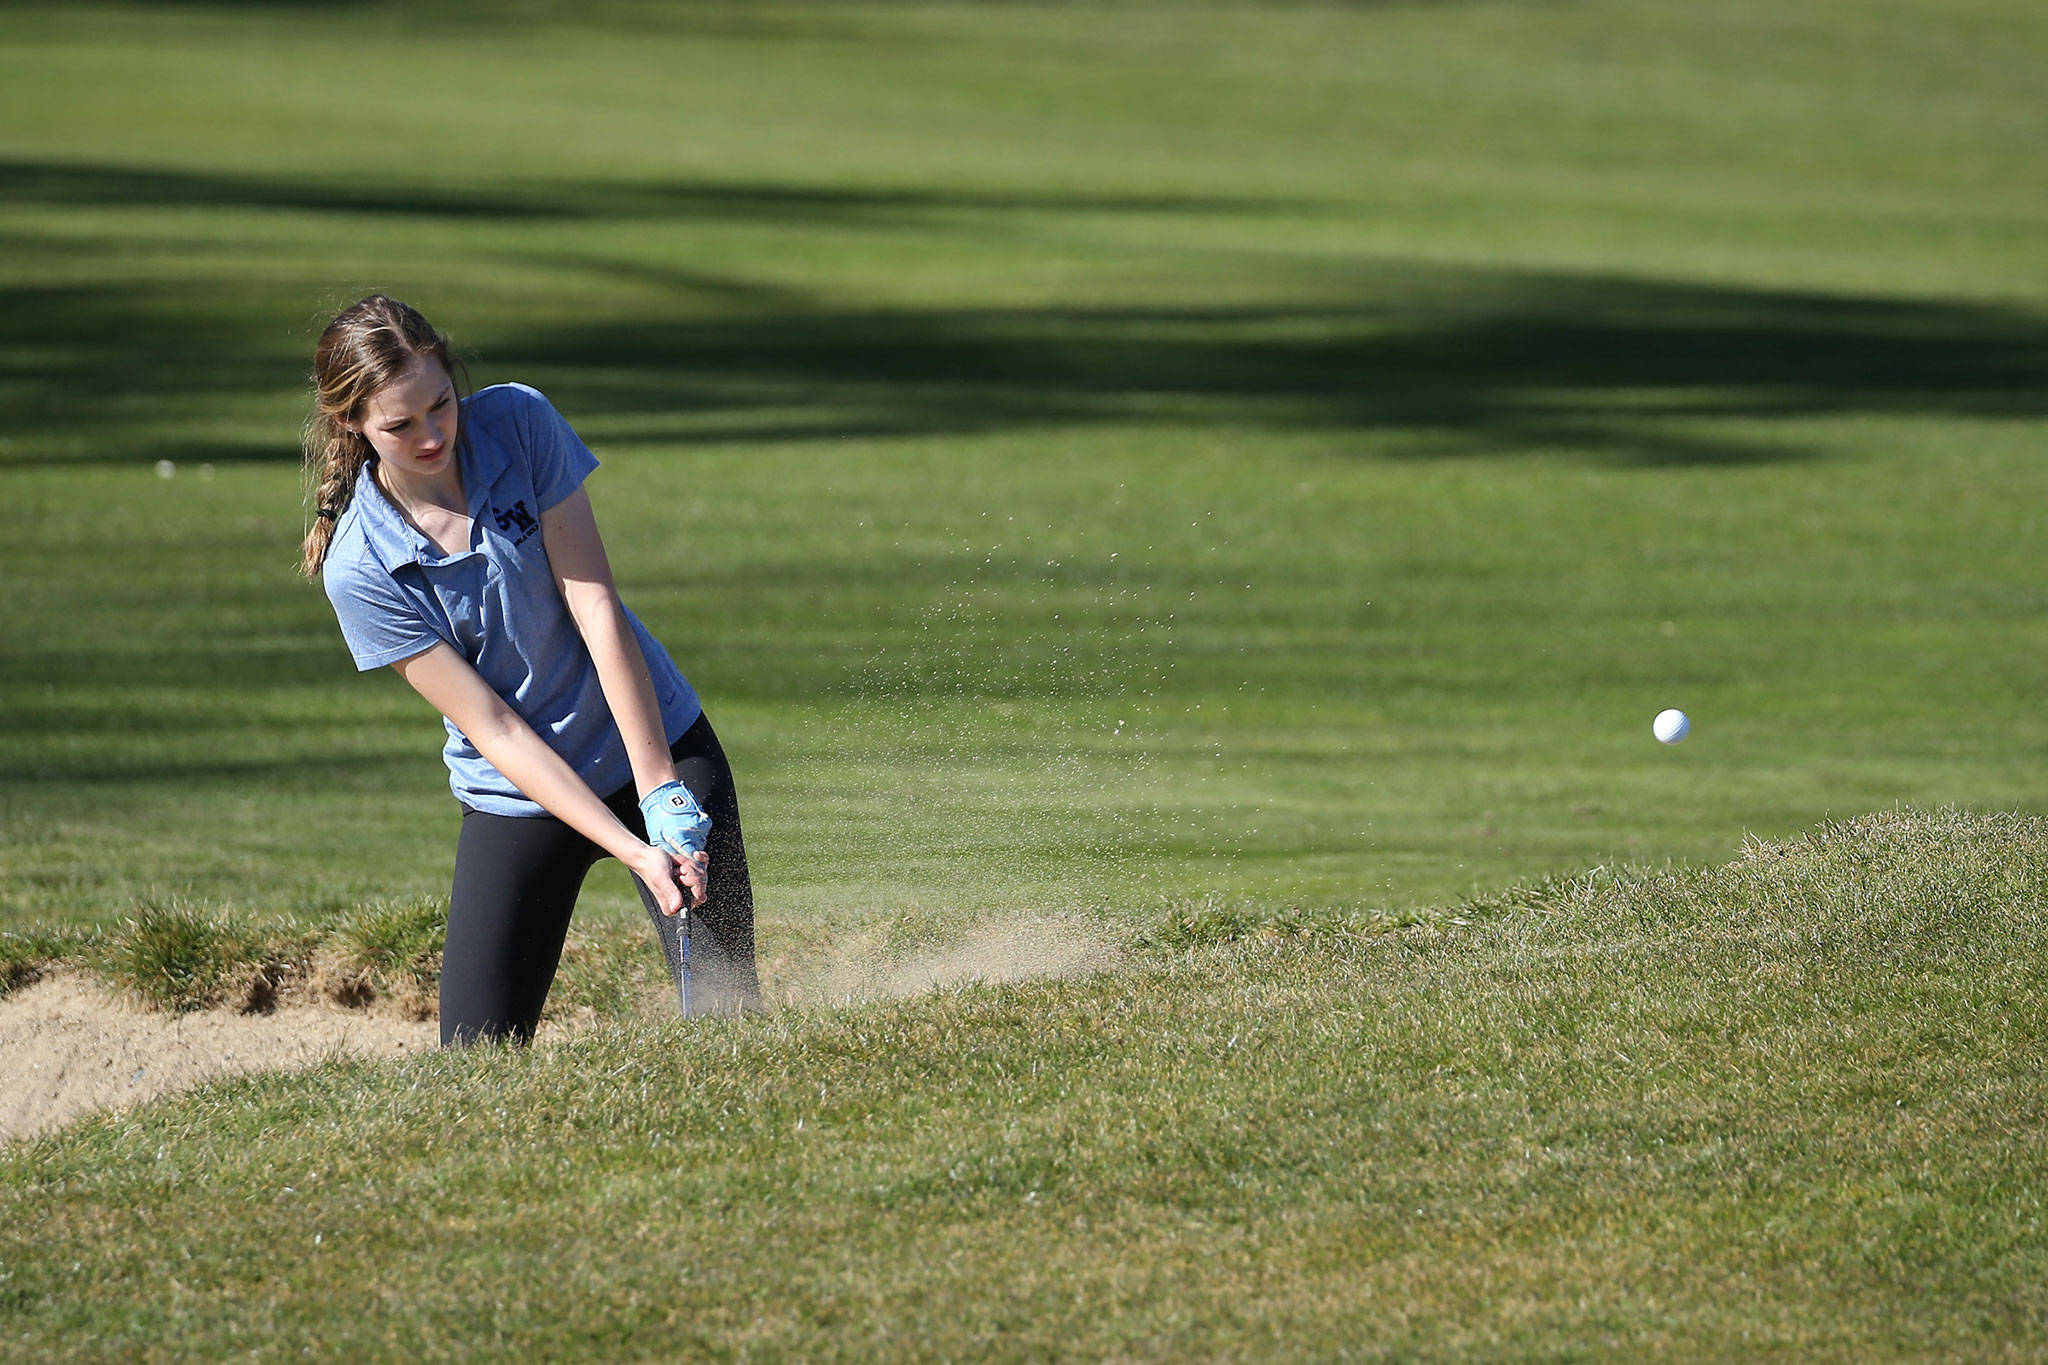 South Whidbey’s Alyssa Ludtke blasts out of trouble at the Whidbey Shootout Tuesday. (Photo by John Fisken)